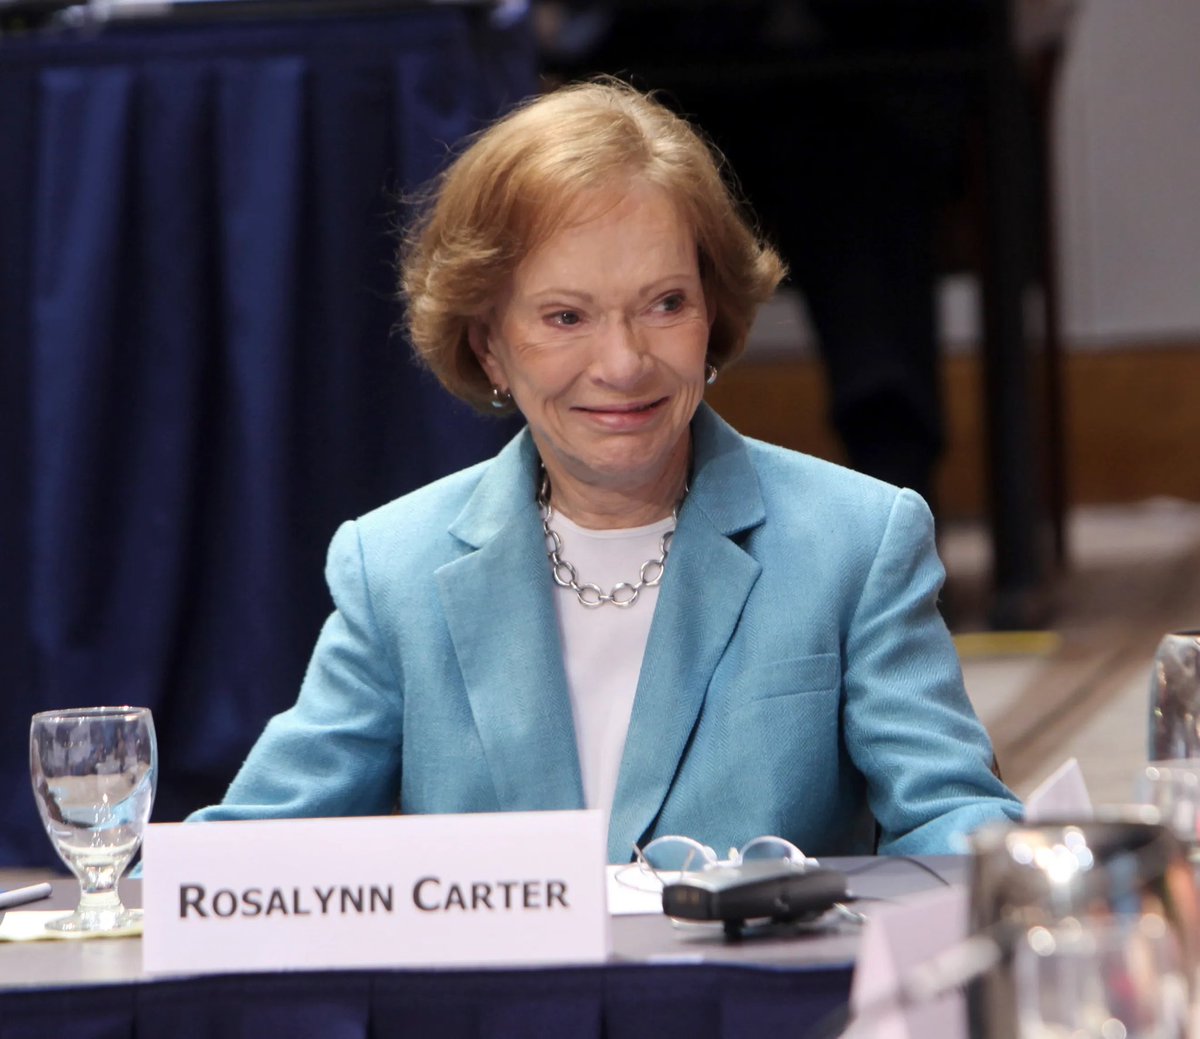 My show today will be a full tribute to First Lady Rosalynn Carter, w/ my guest @GAWINList executive director @melitaeasters & a look back at Rosalynn’s interview w/Bette Davis on Dinah nearly 45 years ago to the day. 5-6p on @AmericaoneR . #RosalynnCarter #JimmyCarter #gapol